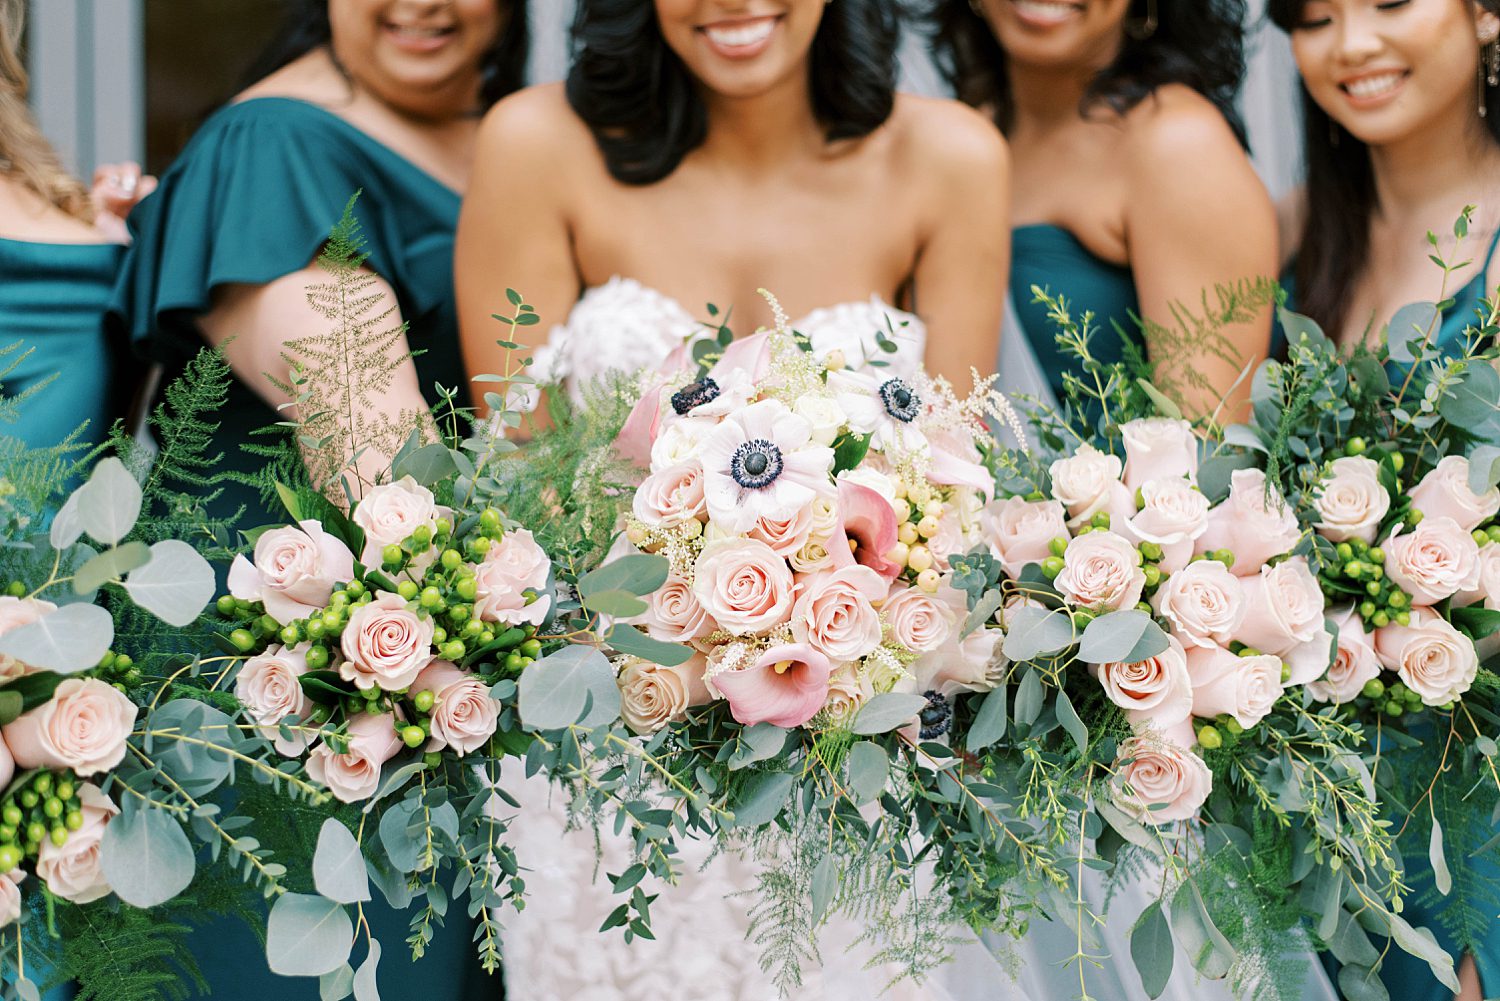 bride poses with bridesmaids in teal gowns holding pink and ivory flowers